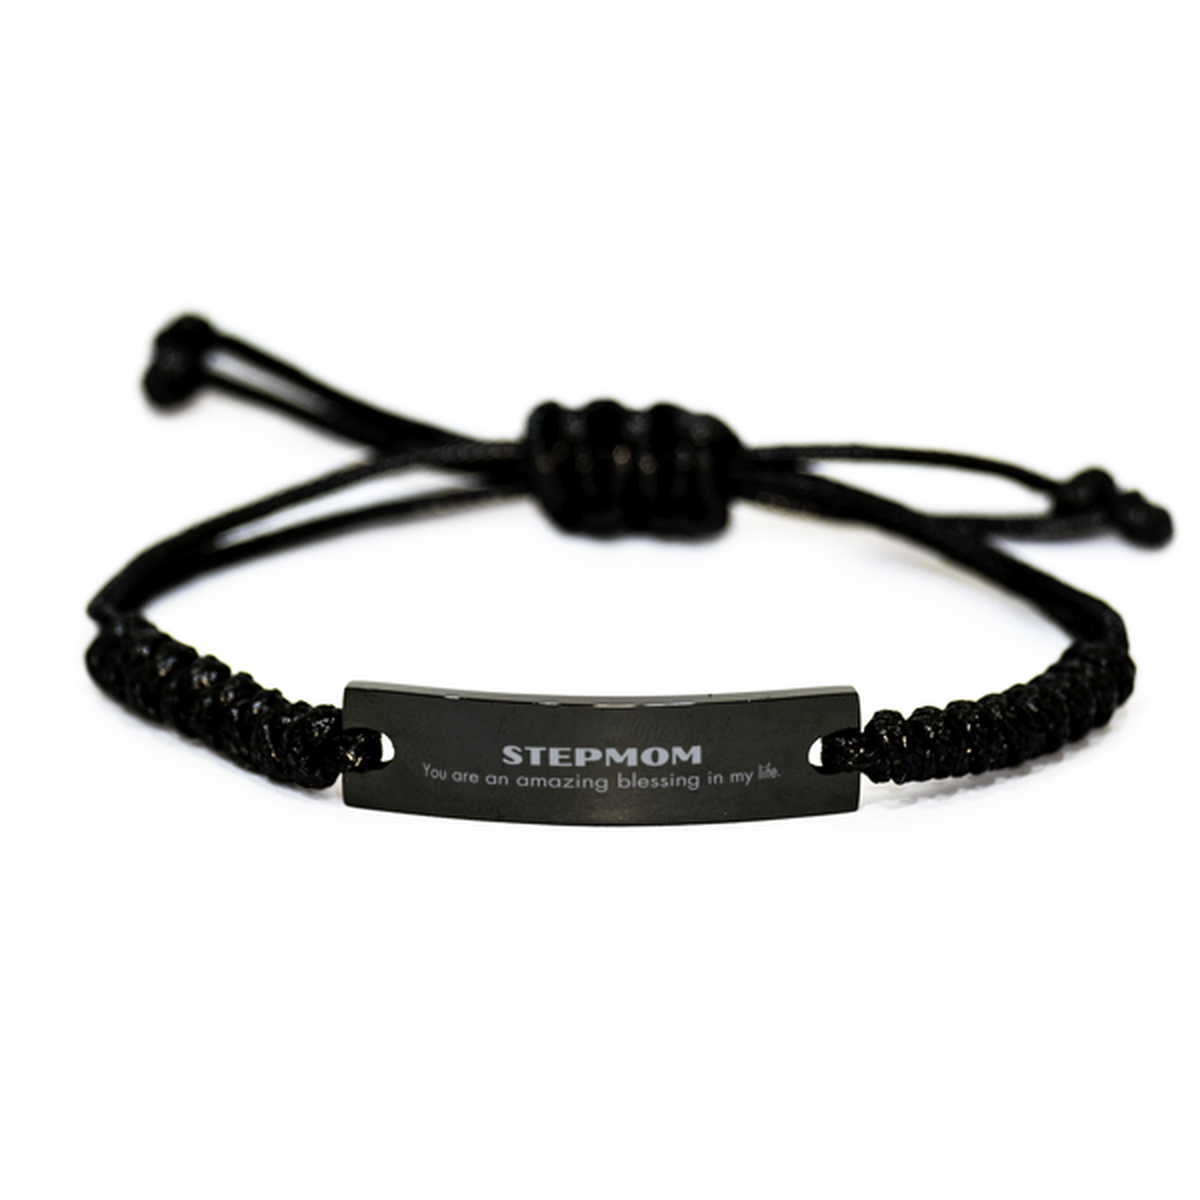 Stepmom Black Rope Bracelet, You are an amazing blessing in my life, Thank You Gifts For Stepmom, Inspirational Birthday Christmas Unique Gifts For Stepmom